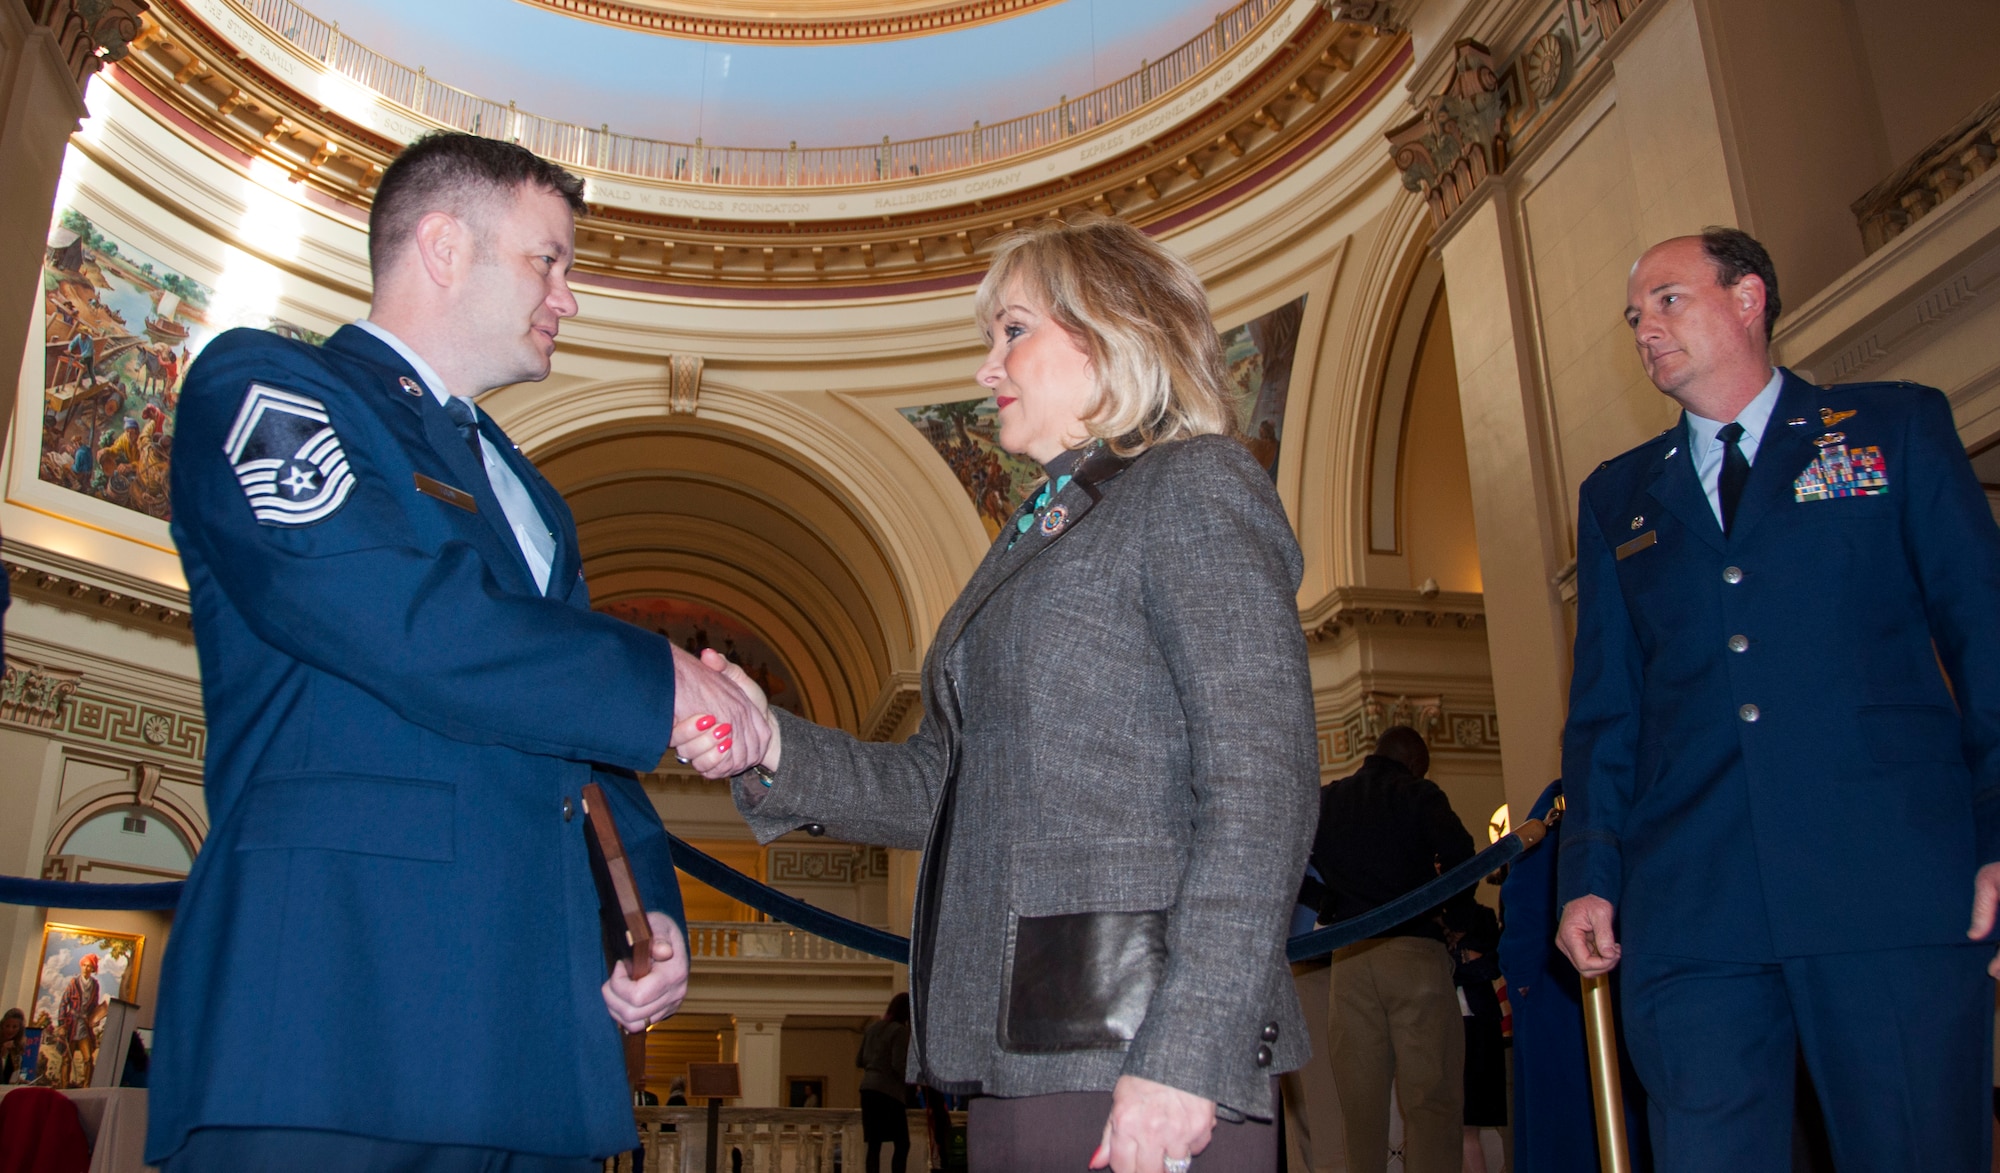 Senior Master Sgt. Kenneth Toon, left 507th Air Refueling Wing recruiting flight chief greets Gov. Mary Fallin at the Oklahoma State Capital, March 5 along with Col. Thomas Smith, 507th Operations Group commander, right.   Some of the 507th Air Refueling Wing’s newest Air Force Reserve recruiters met with the Oklahoma governor to thank her for her support to their recruiting efforts in the greater Oklahoma area.  (U.S. Air Force Photo/Maj. Jon Quinlan)